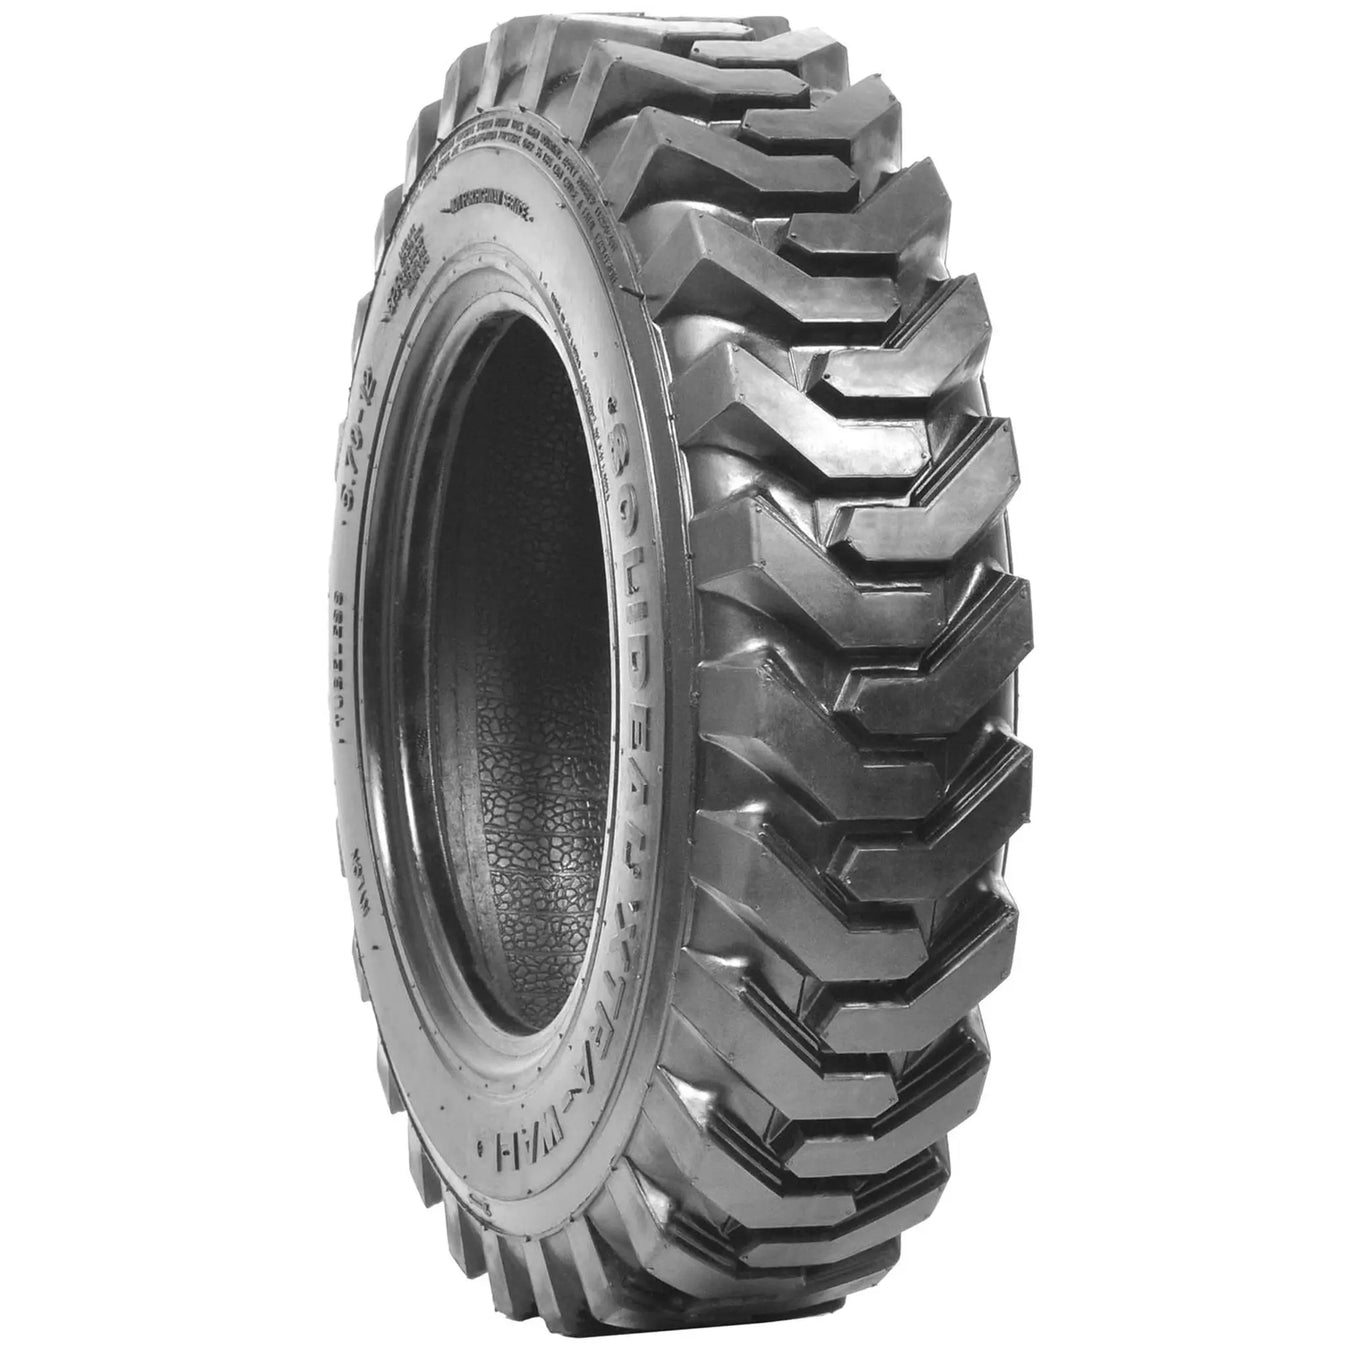 Skid Steer Tires - Pneumatic Tire Size - 5.70-12